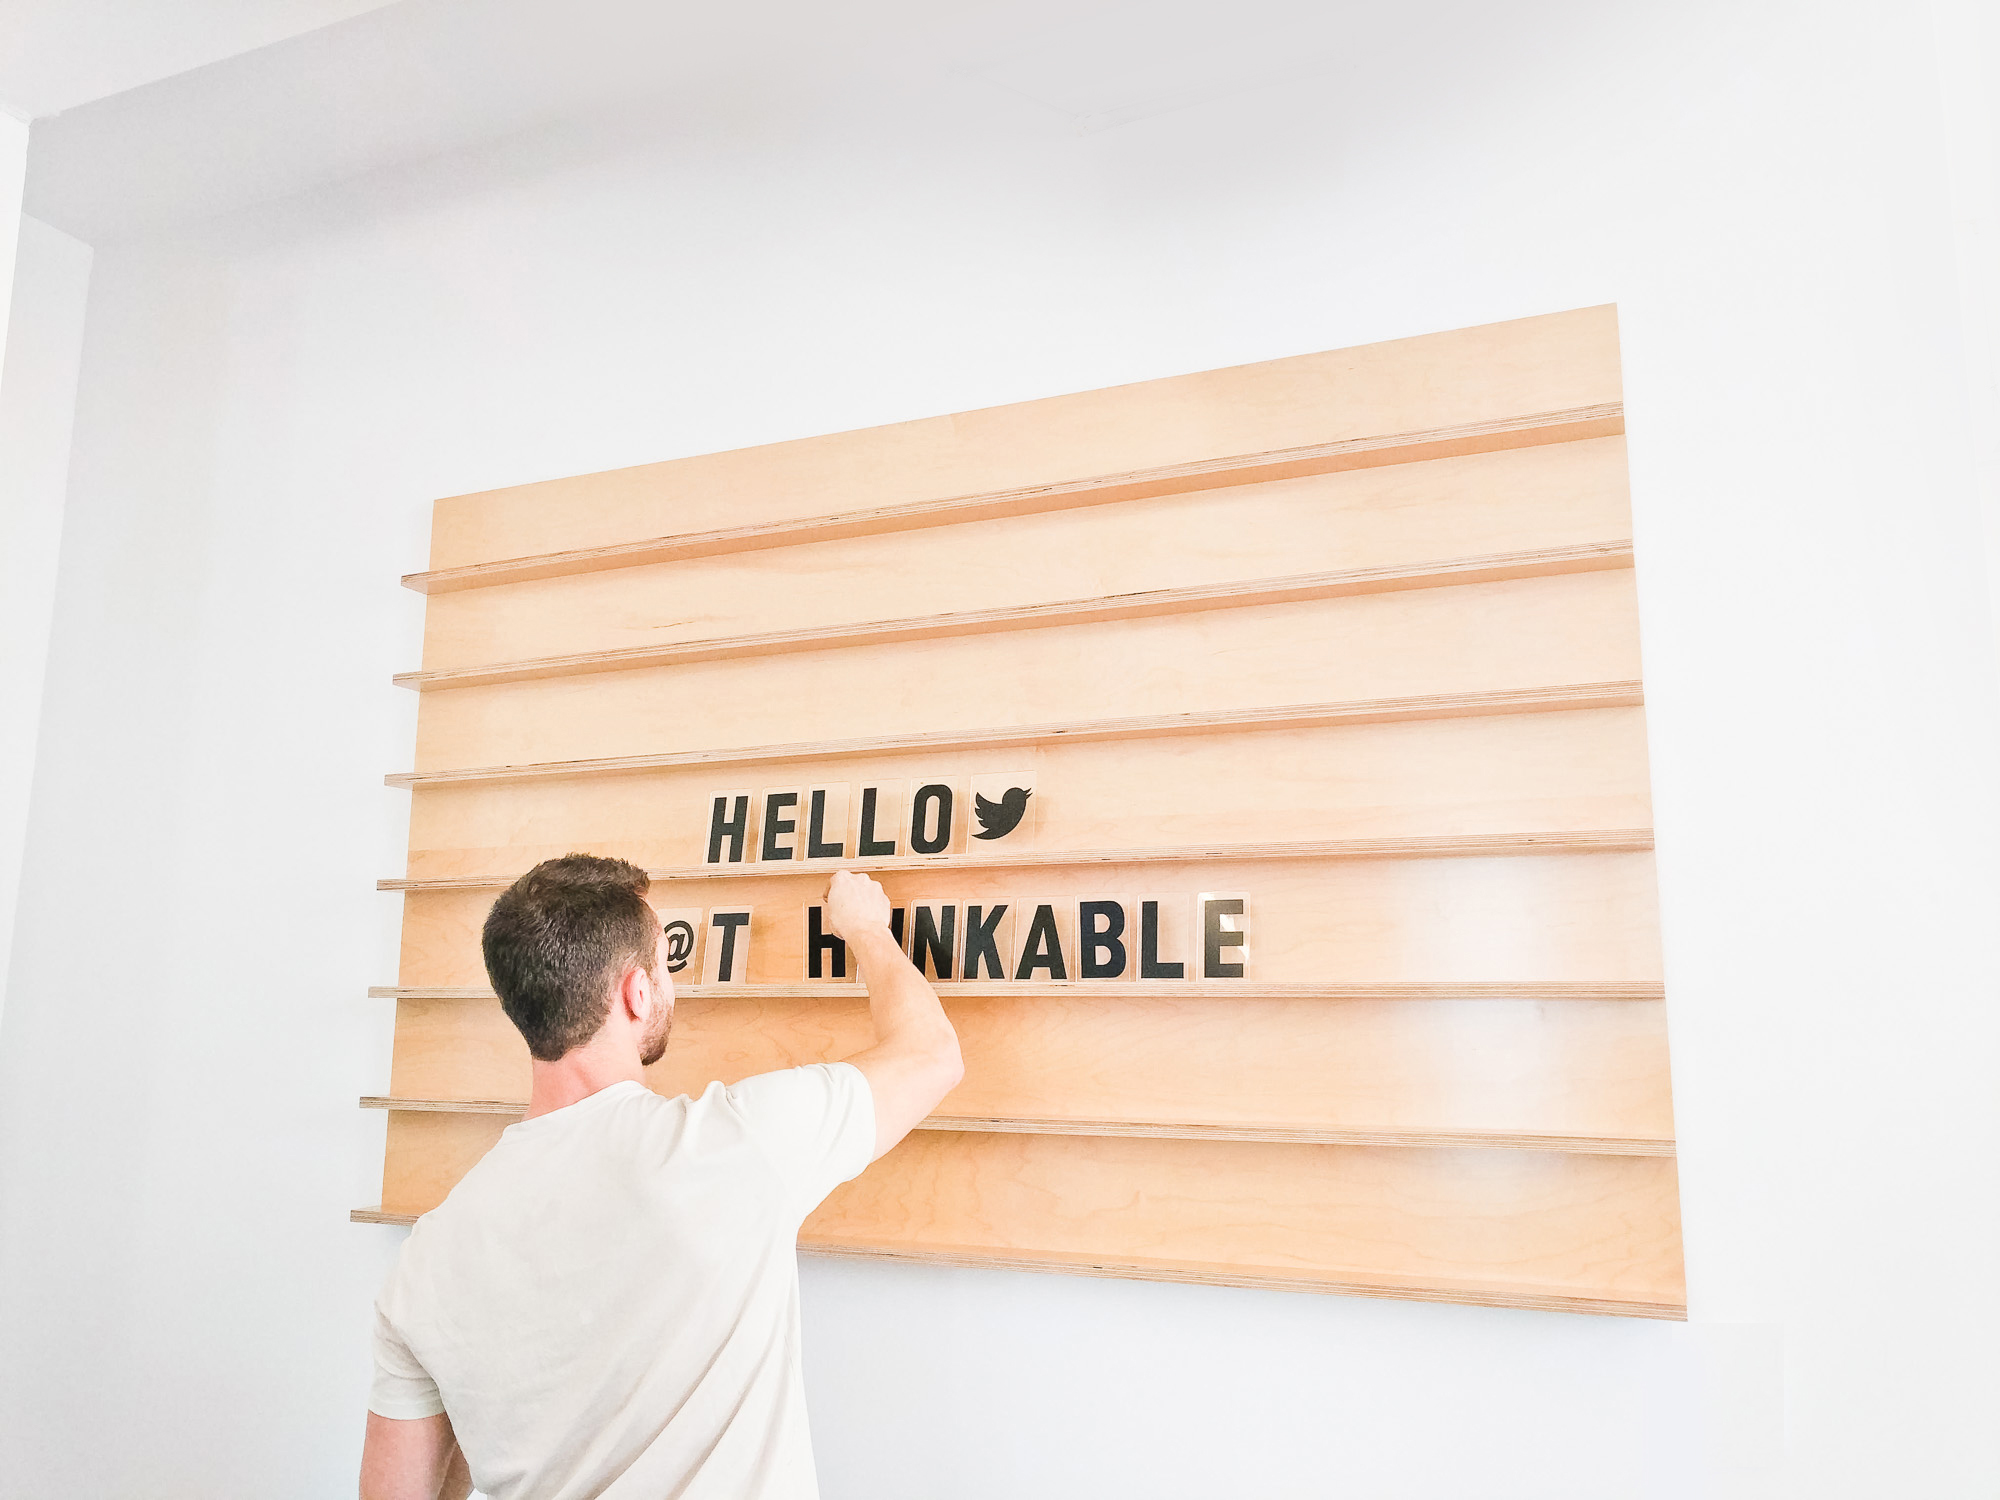 Wood message board with rails and clear letters for the office of Thunkable, a cross-platform app builder that enables anyone to build their own native mobile apps.